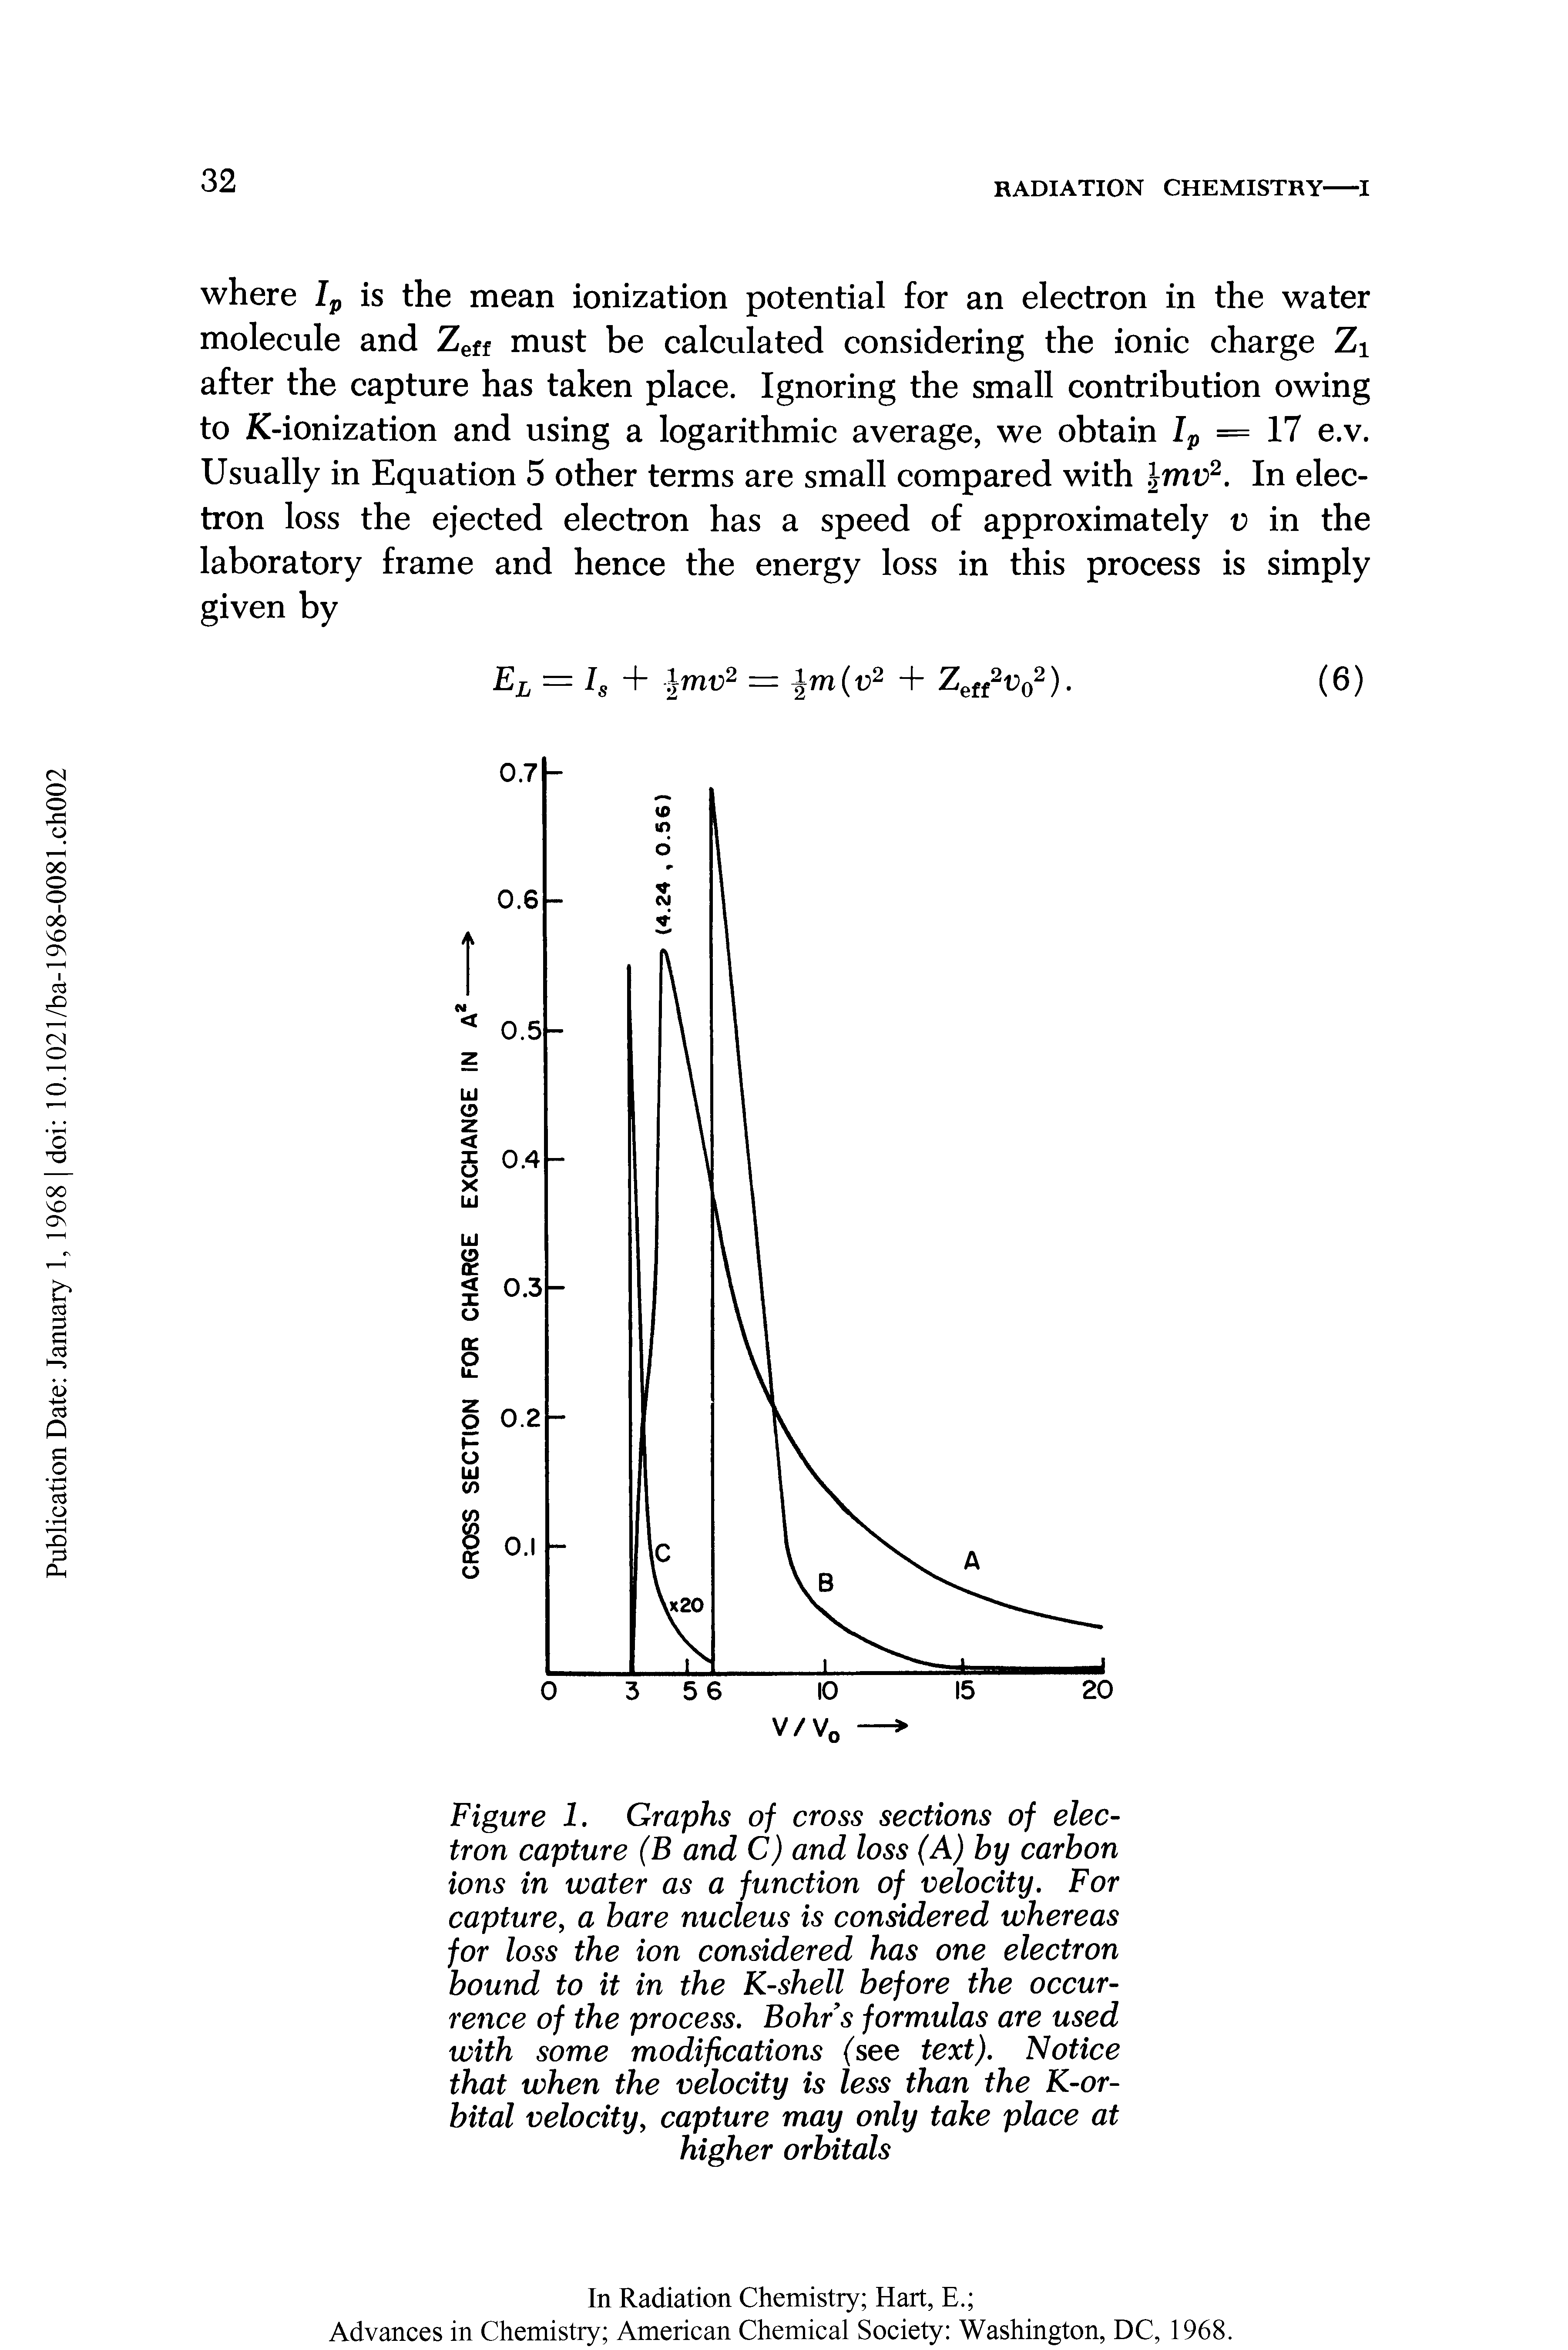 Figure 1. Graphs of cross sections of electron capture (B and C) and loss (A) by carbon ions in water as a function of velocity. For capture, a bare nucleus is considered whereas for loss the ion considered has one electron bound to it in the K-shell before the occurrence of the process. Bohrs formulas are used with some modifications (see text). Notice that when the velocity is less than the K-or-bital velocity, capture may only take place at higher orbitals...